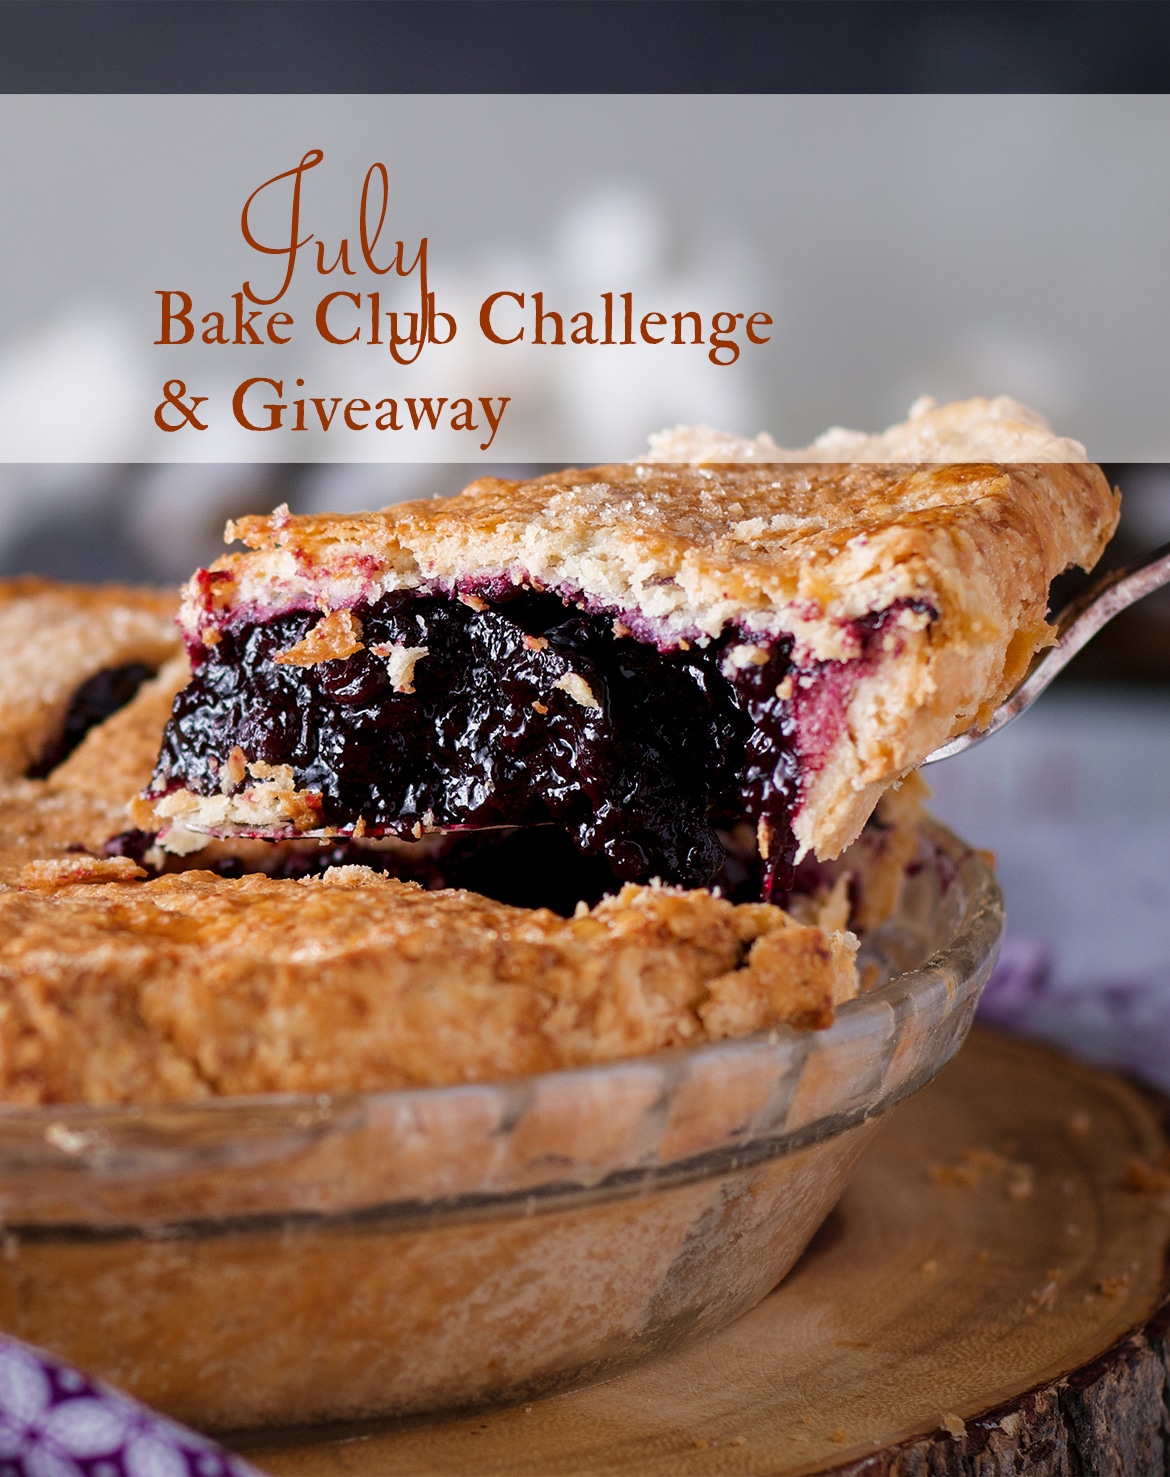 The July Bake Club Challenge Recipe is Blueberry Pie